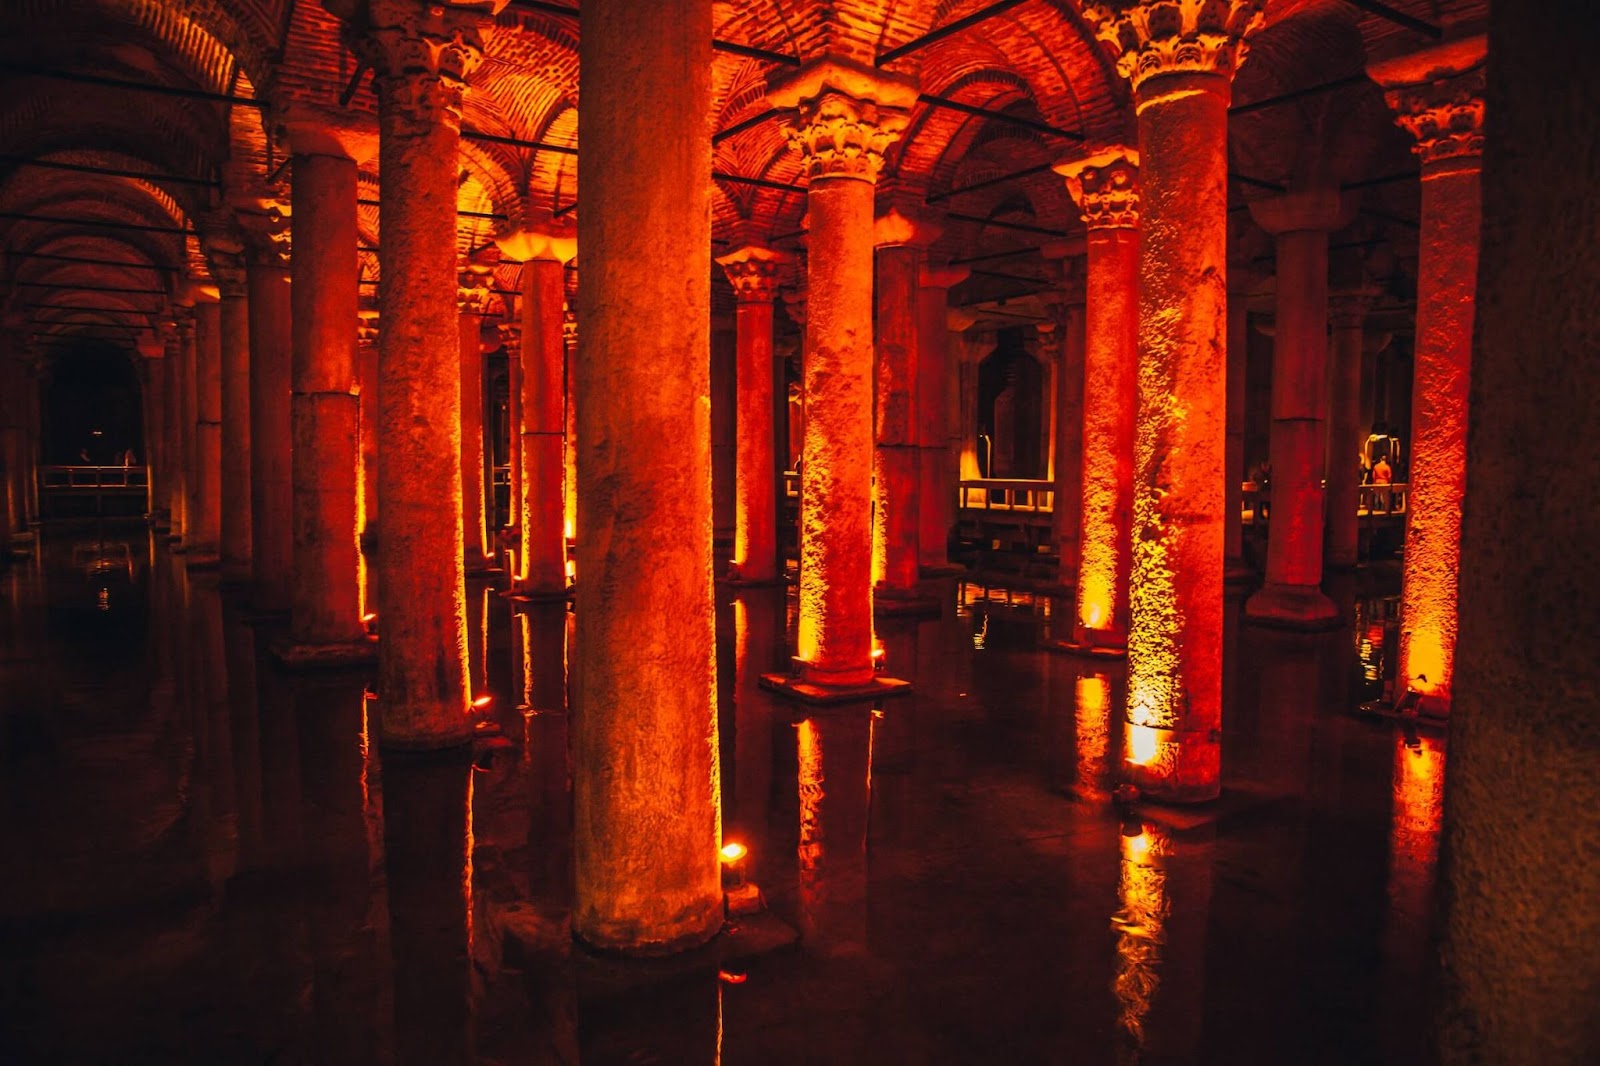 2 days in Istanbul itinerary, the interiors of Basilica Cistern with its pathways illuminated with red and green lights